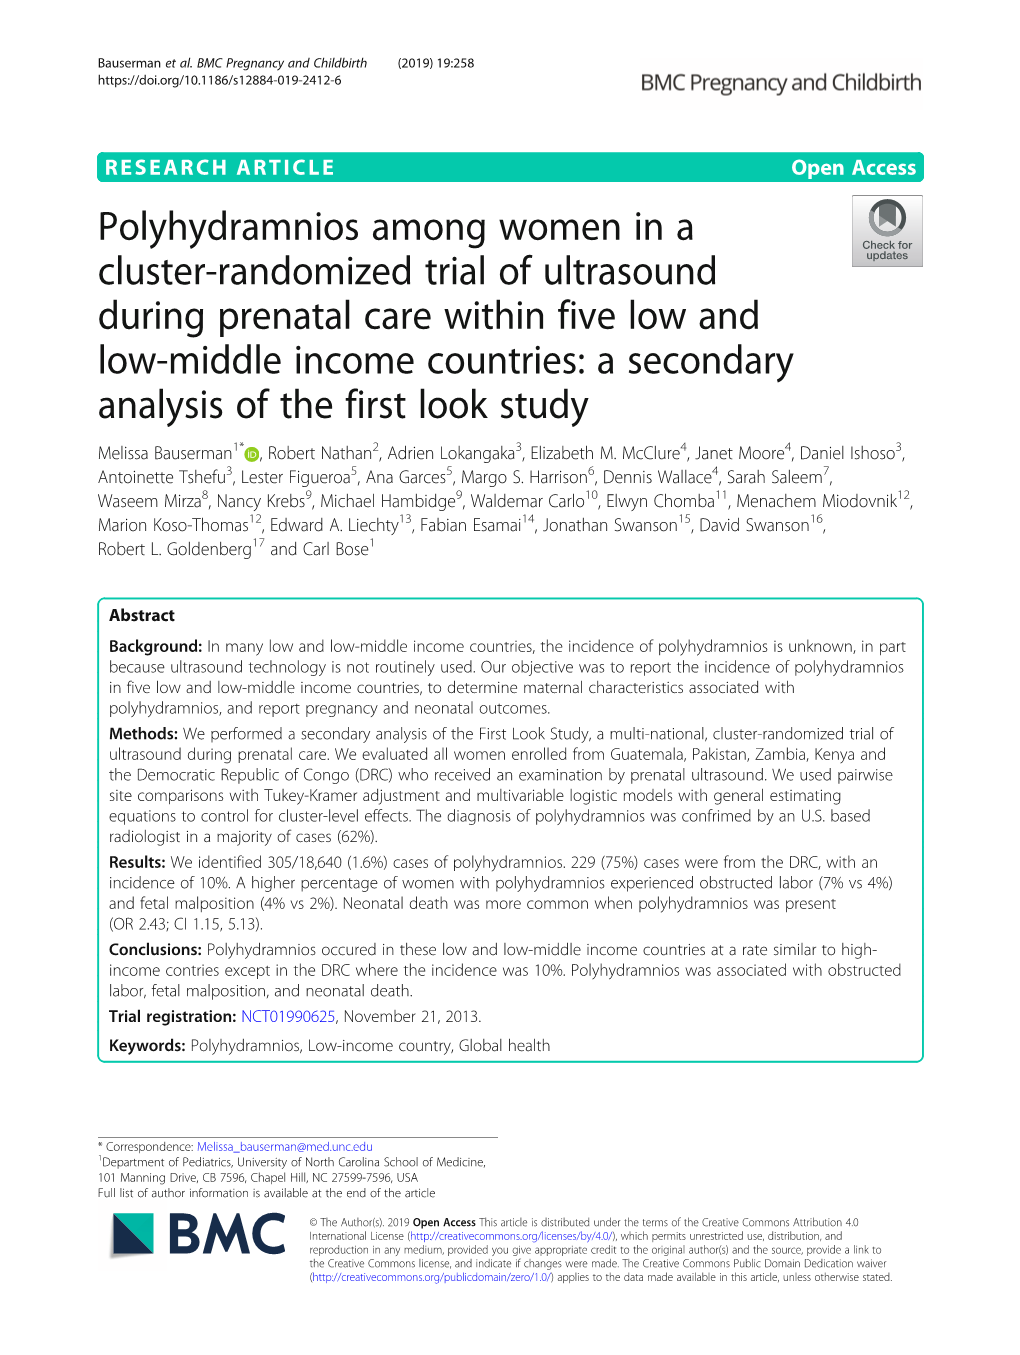 Polyhydramnios Among Women in a Cluster-Randomized Trial Of